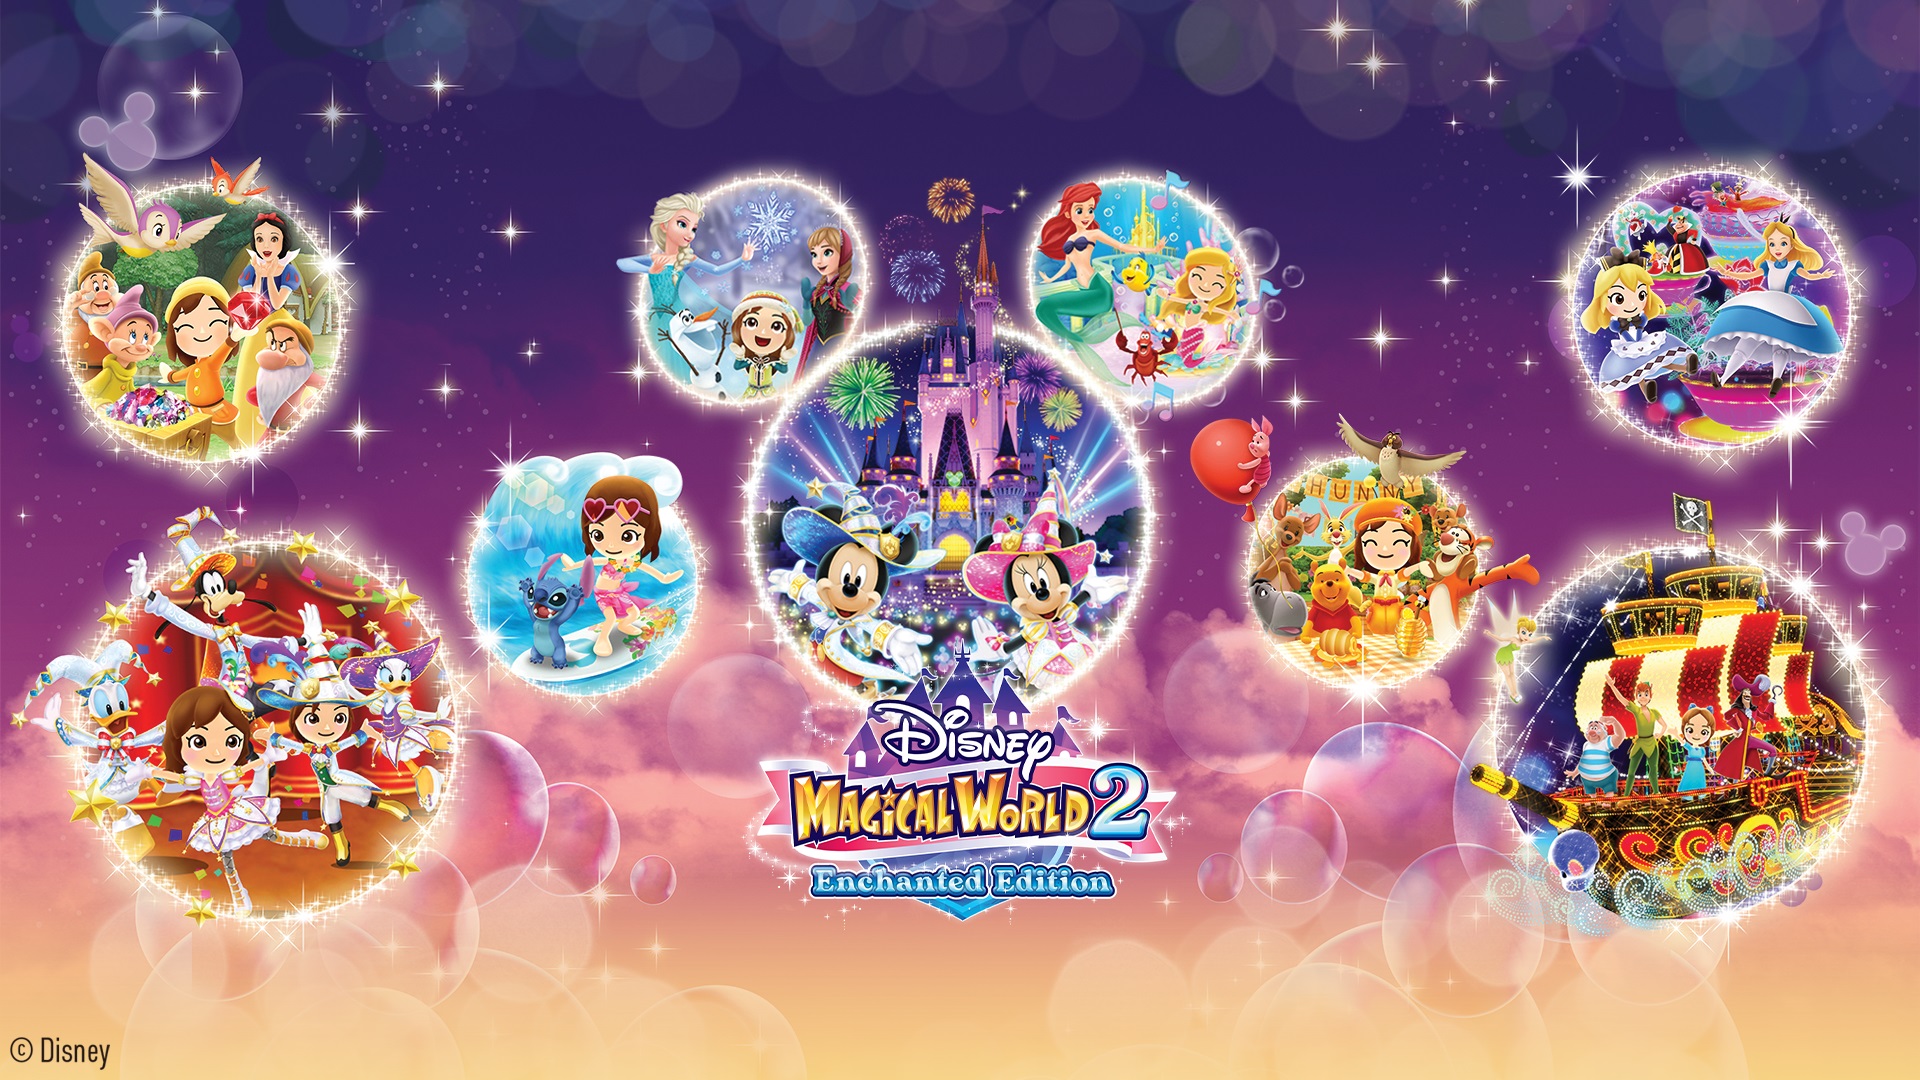 Disney Magical World 2: Enchanted Edition announced for Switch